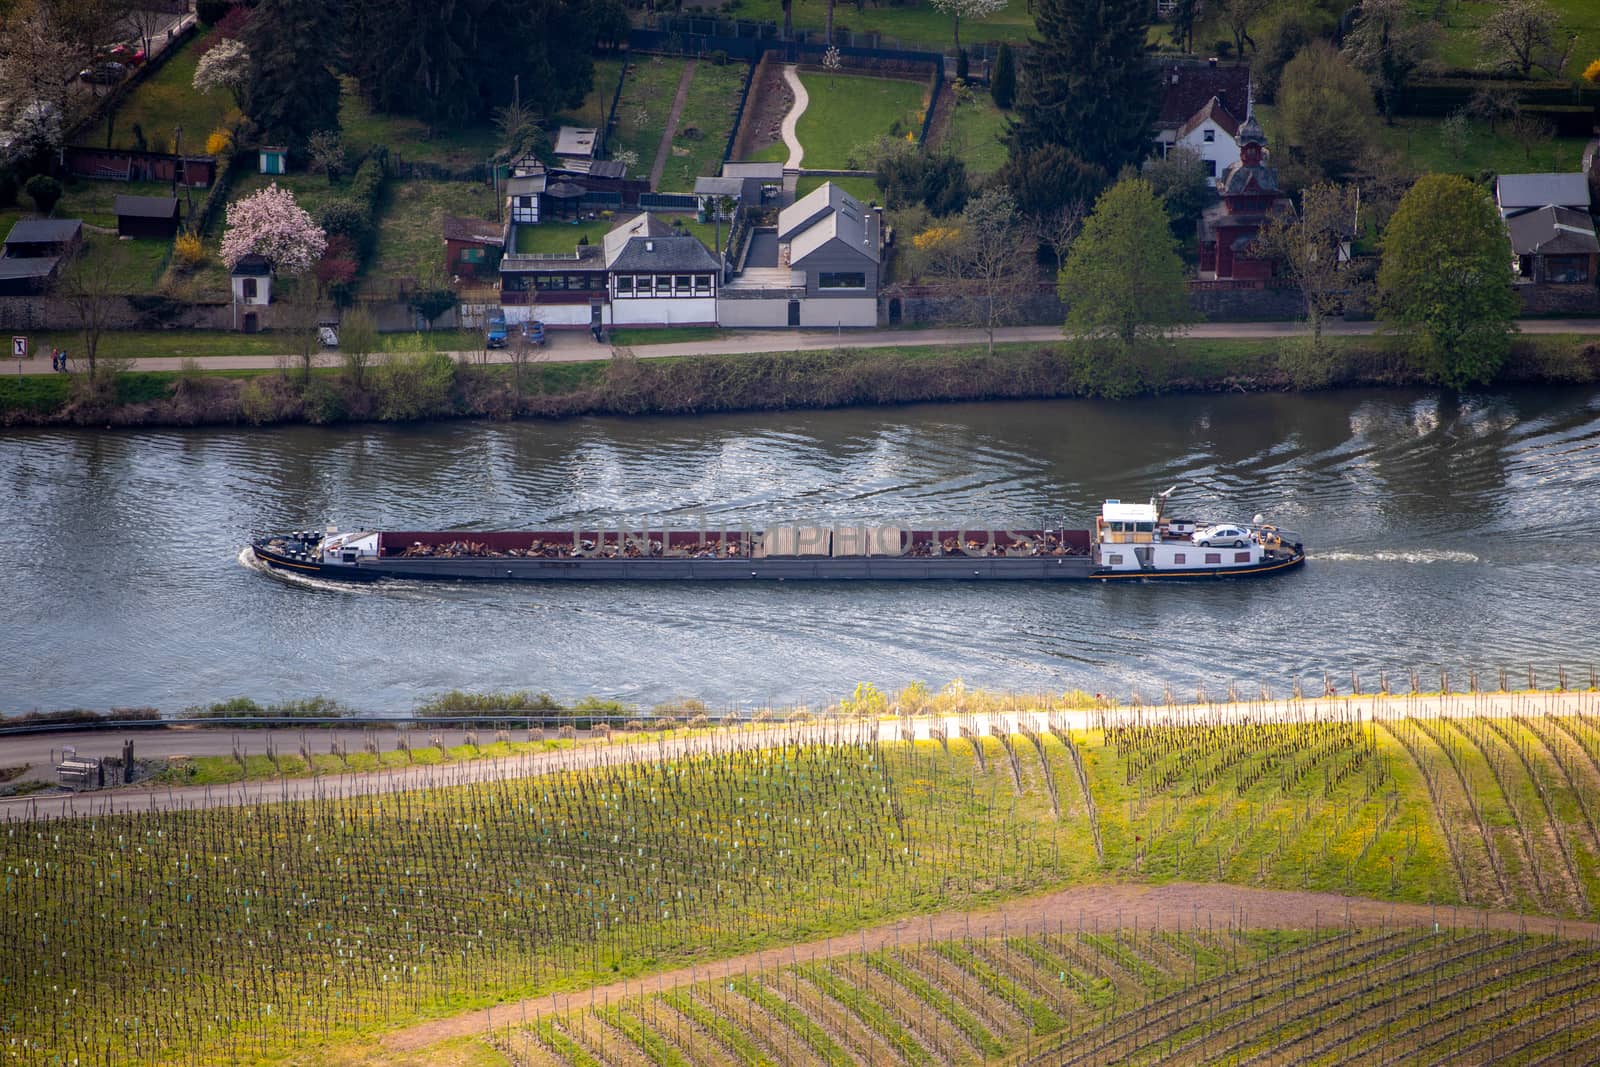 Cargo ship on the river Moselle, Germany with the wine village Wehlen in the background